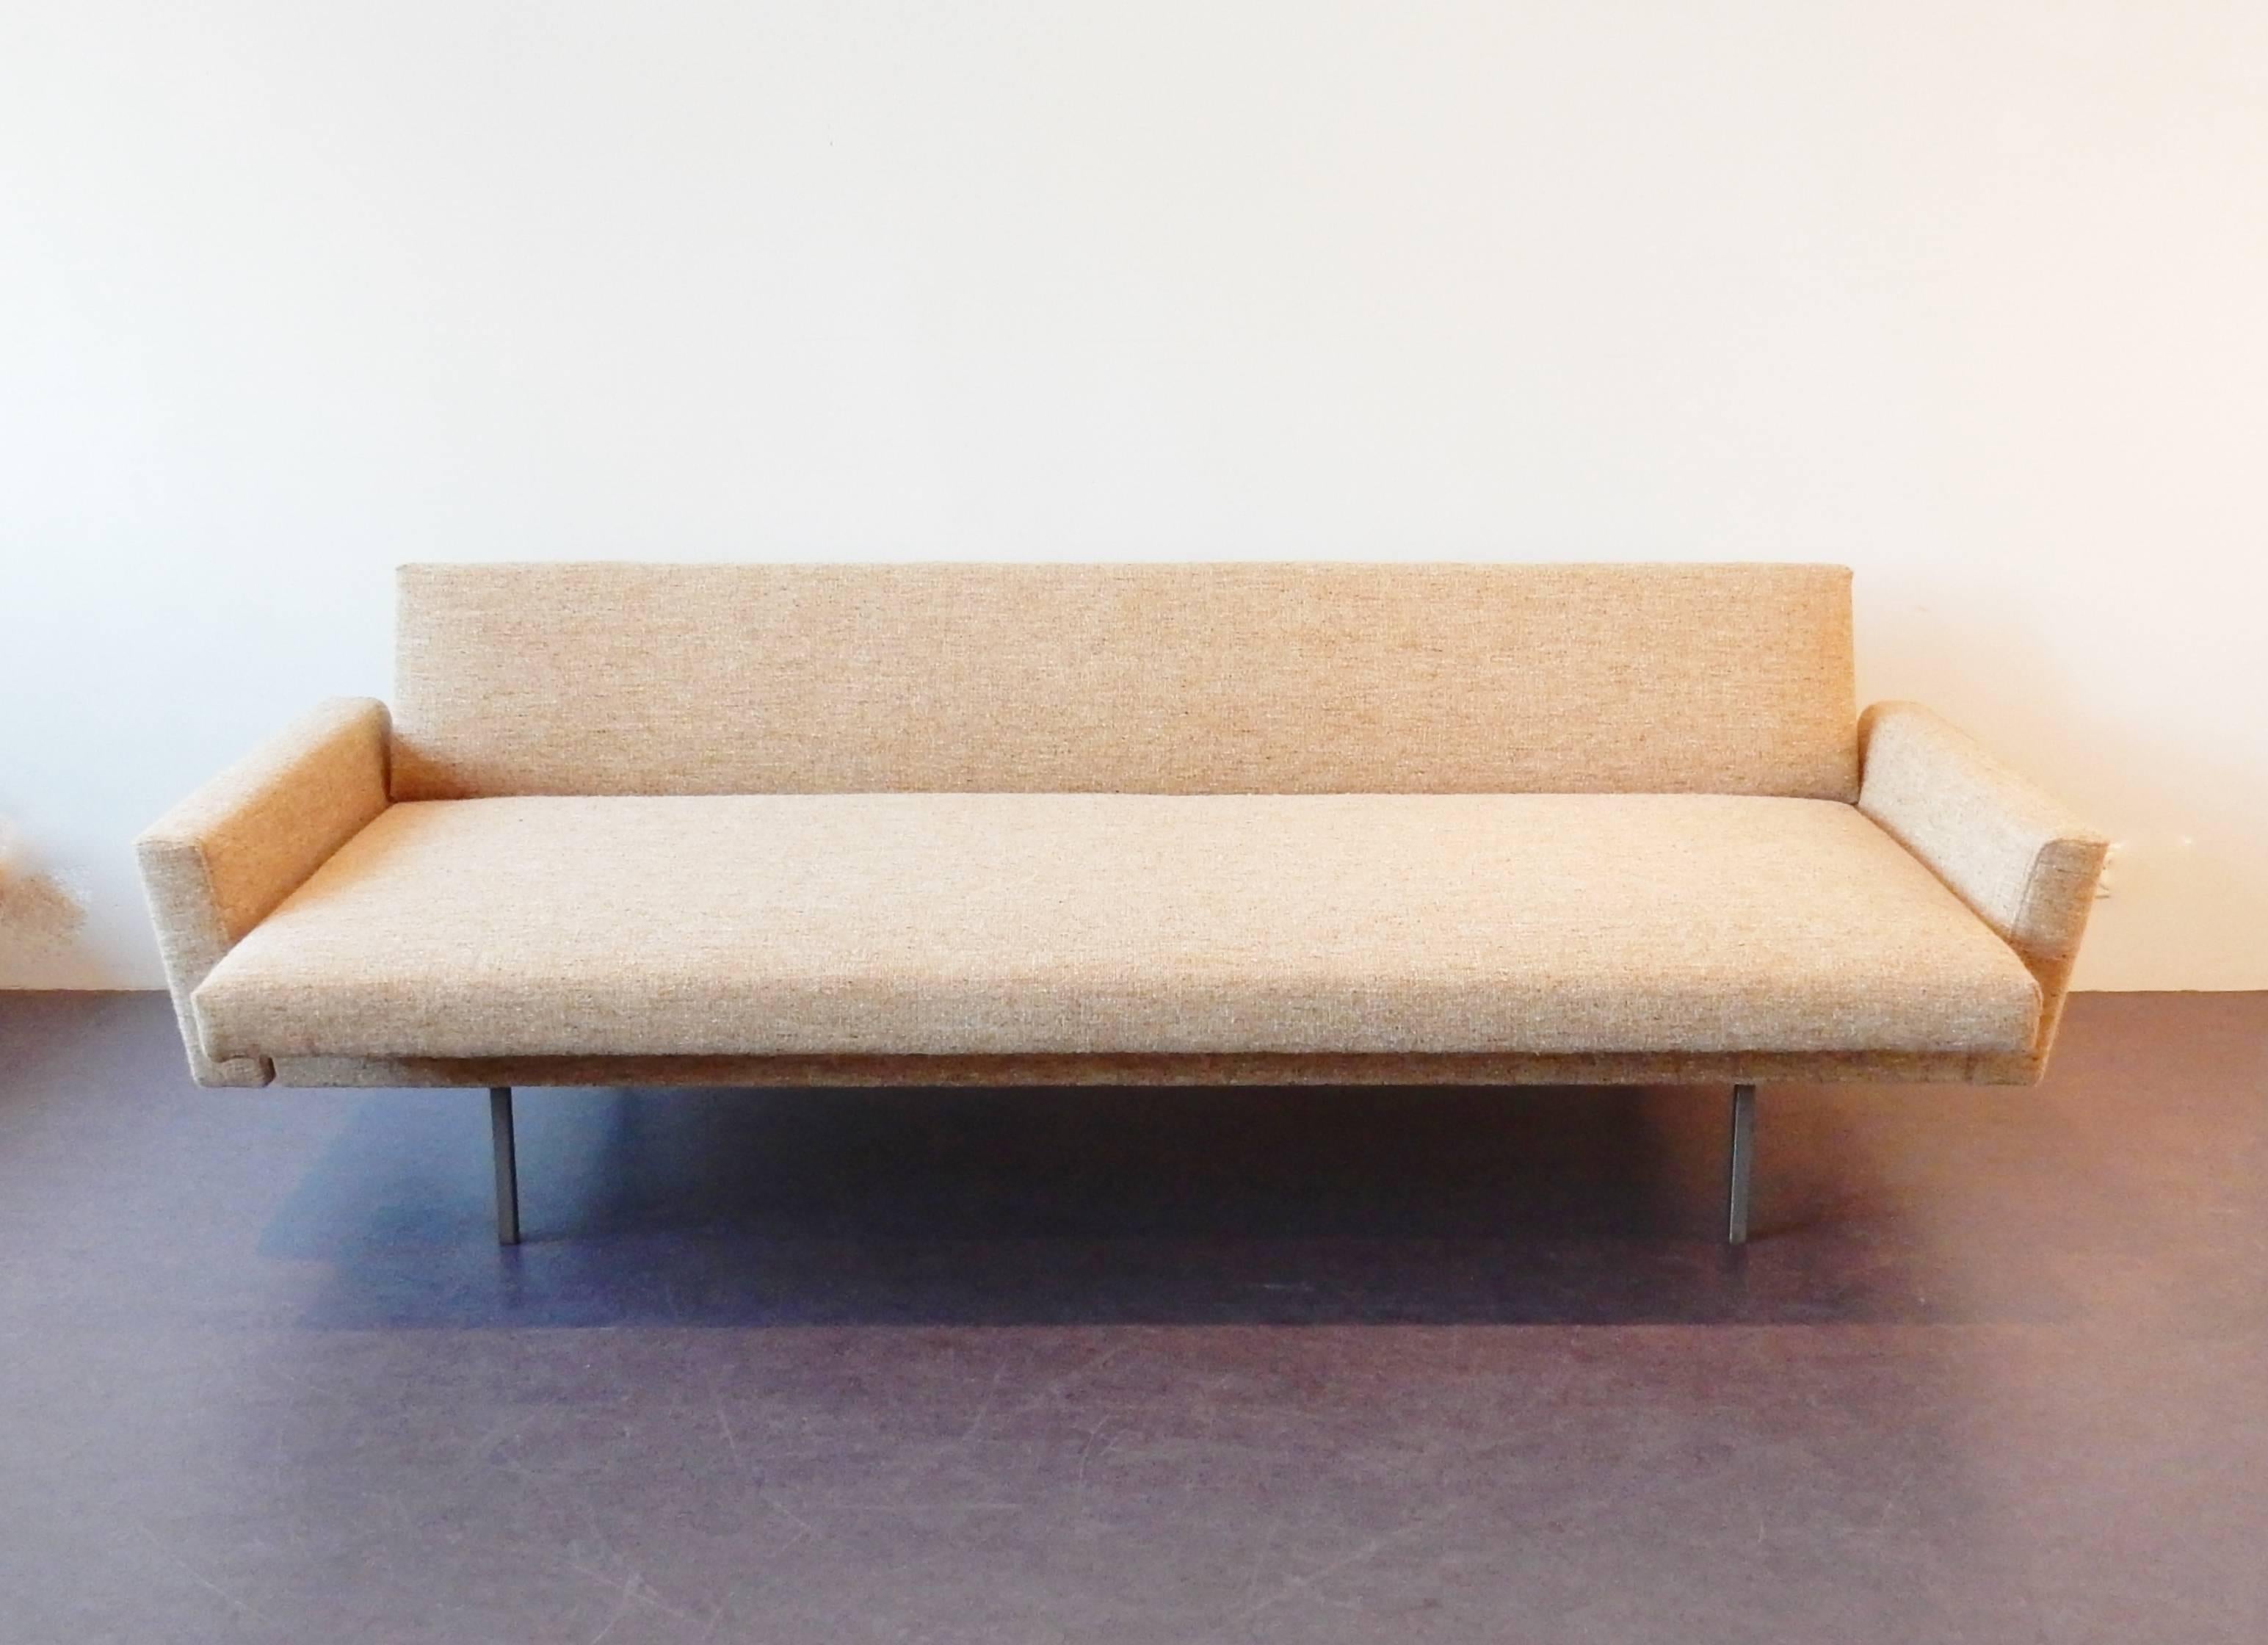 Mid-Century Modern Sofa or Daybed by Rob Parry for Gelderland, Netherlands, Late 1950s